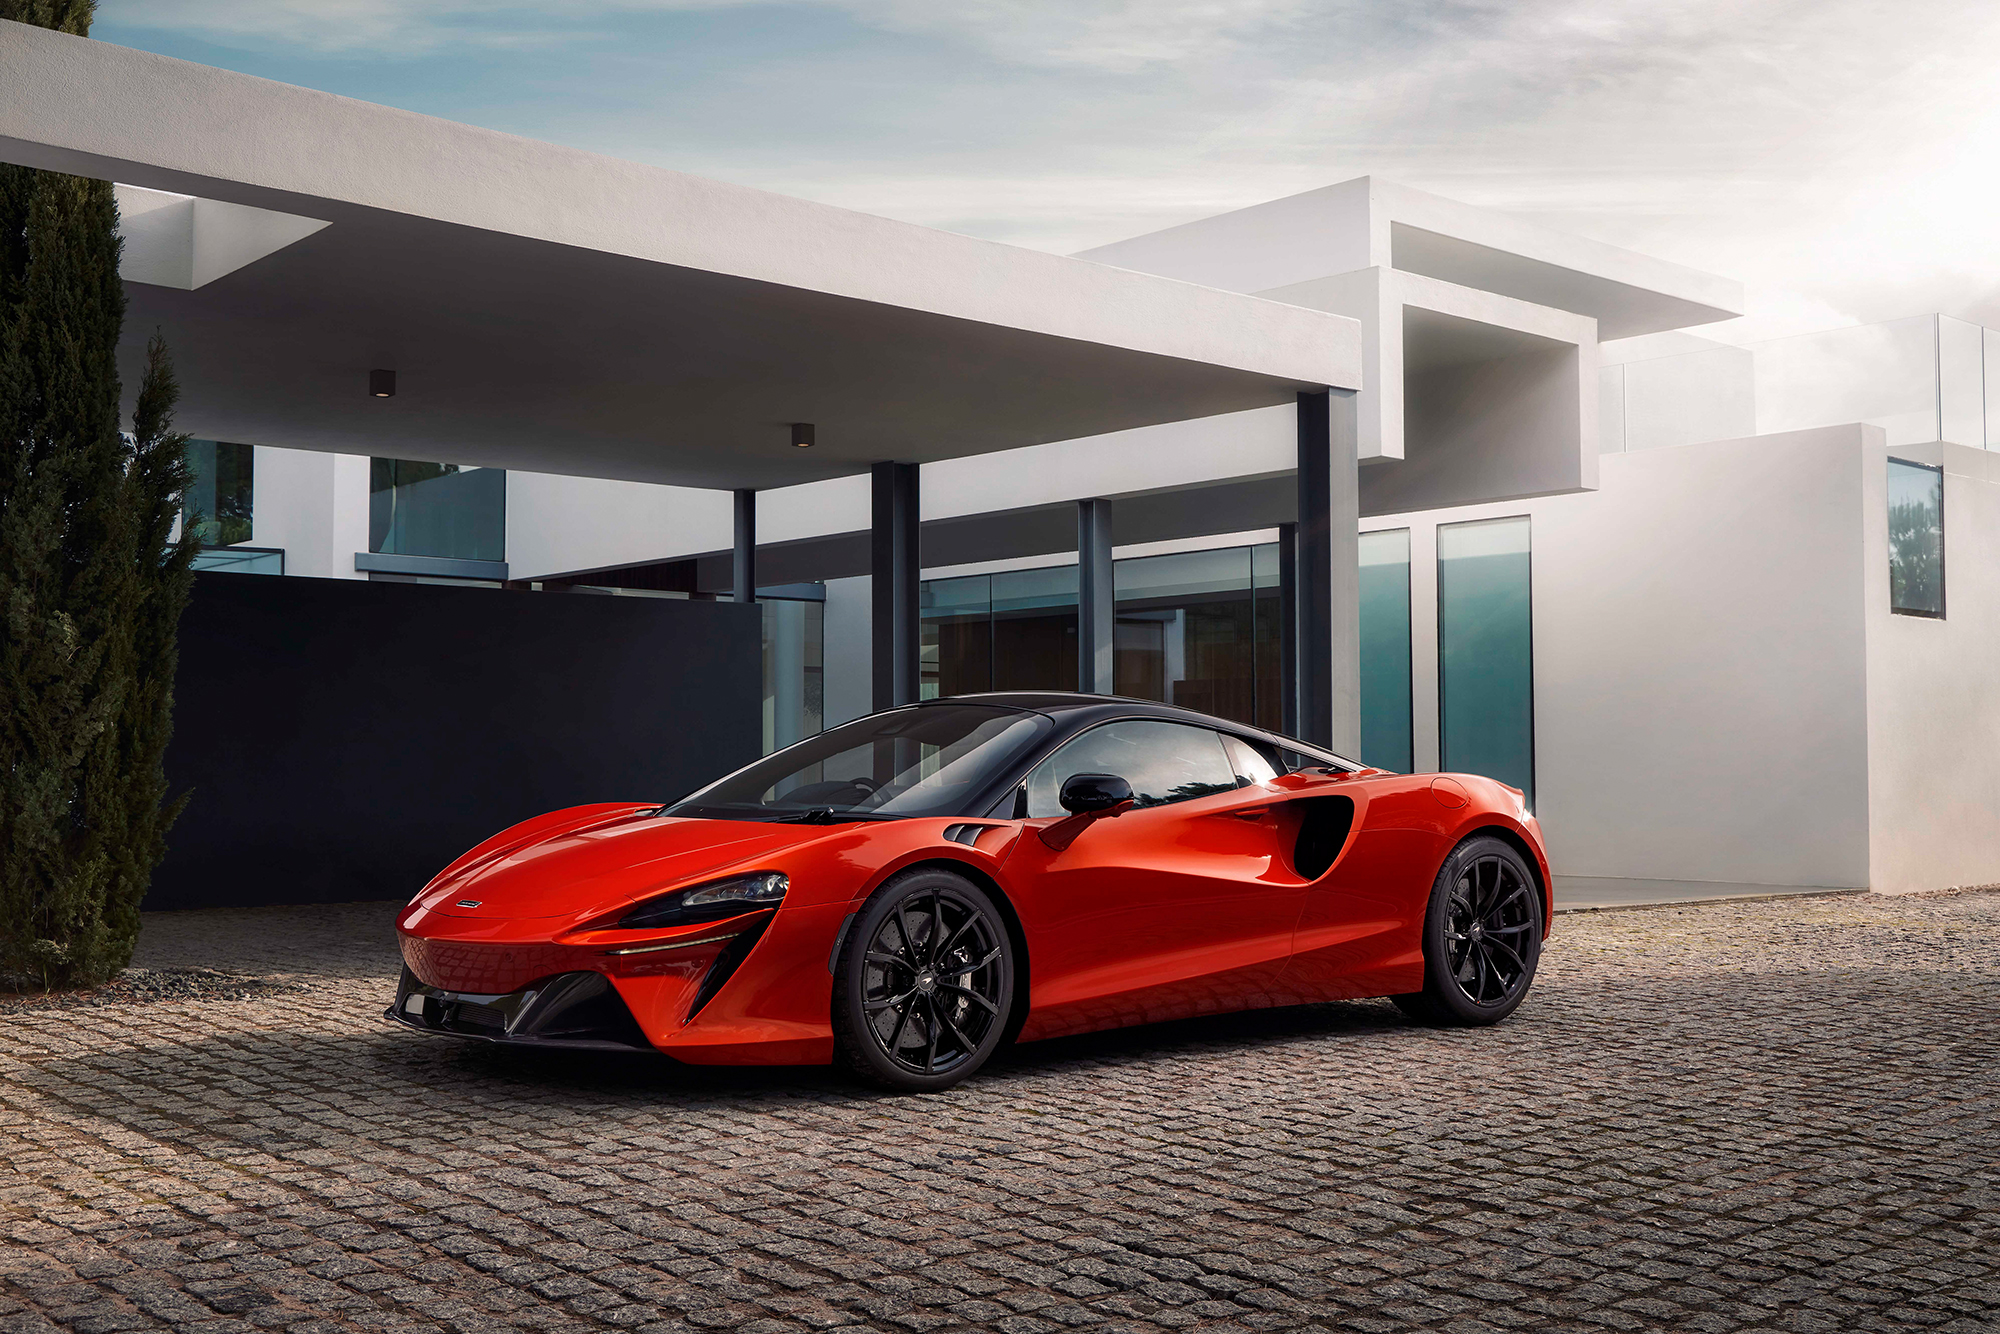 McLaren's new hybrid supercar has computer chips in its tires